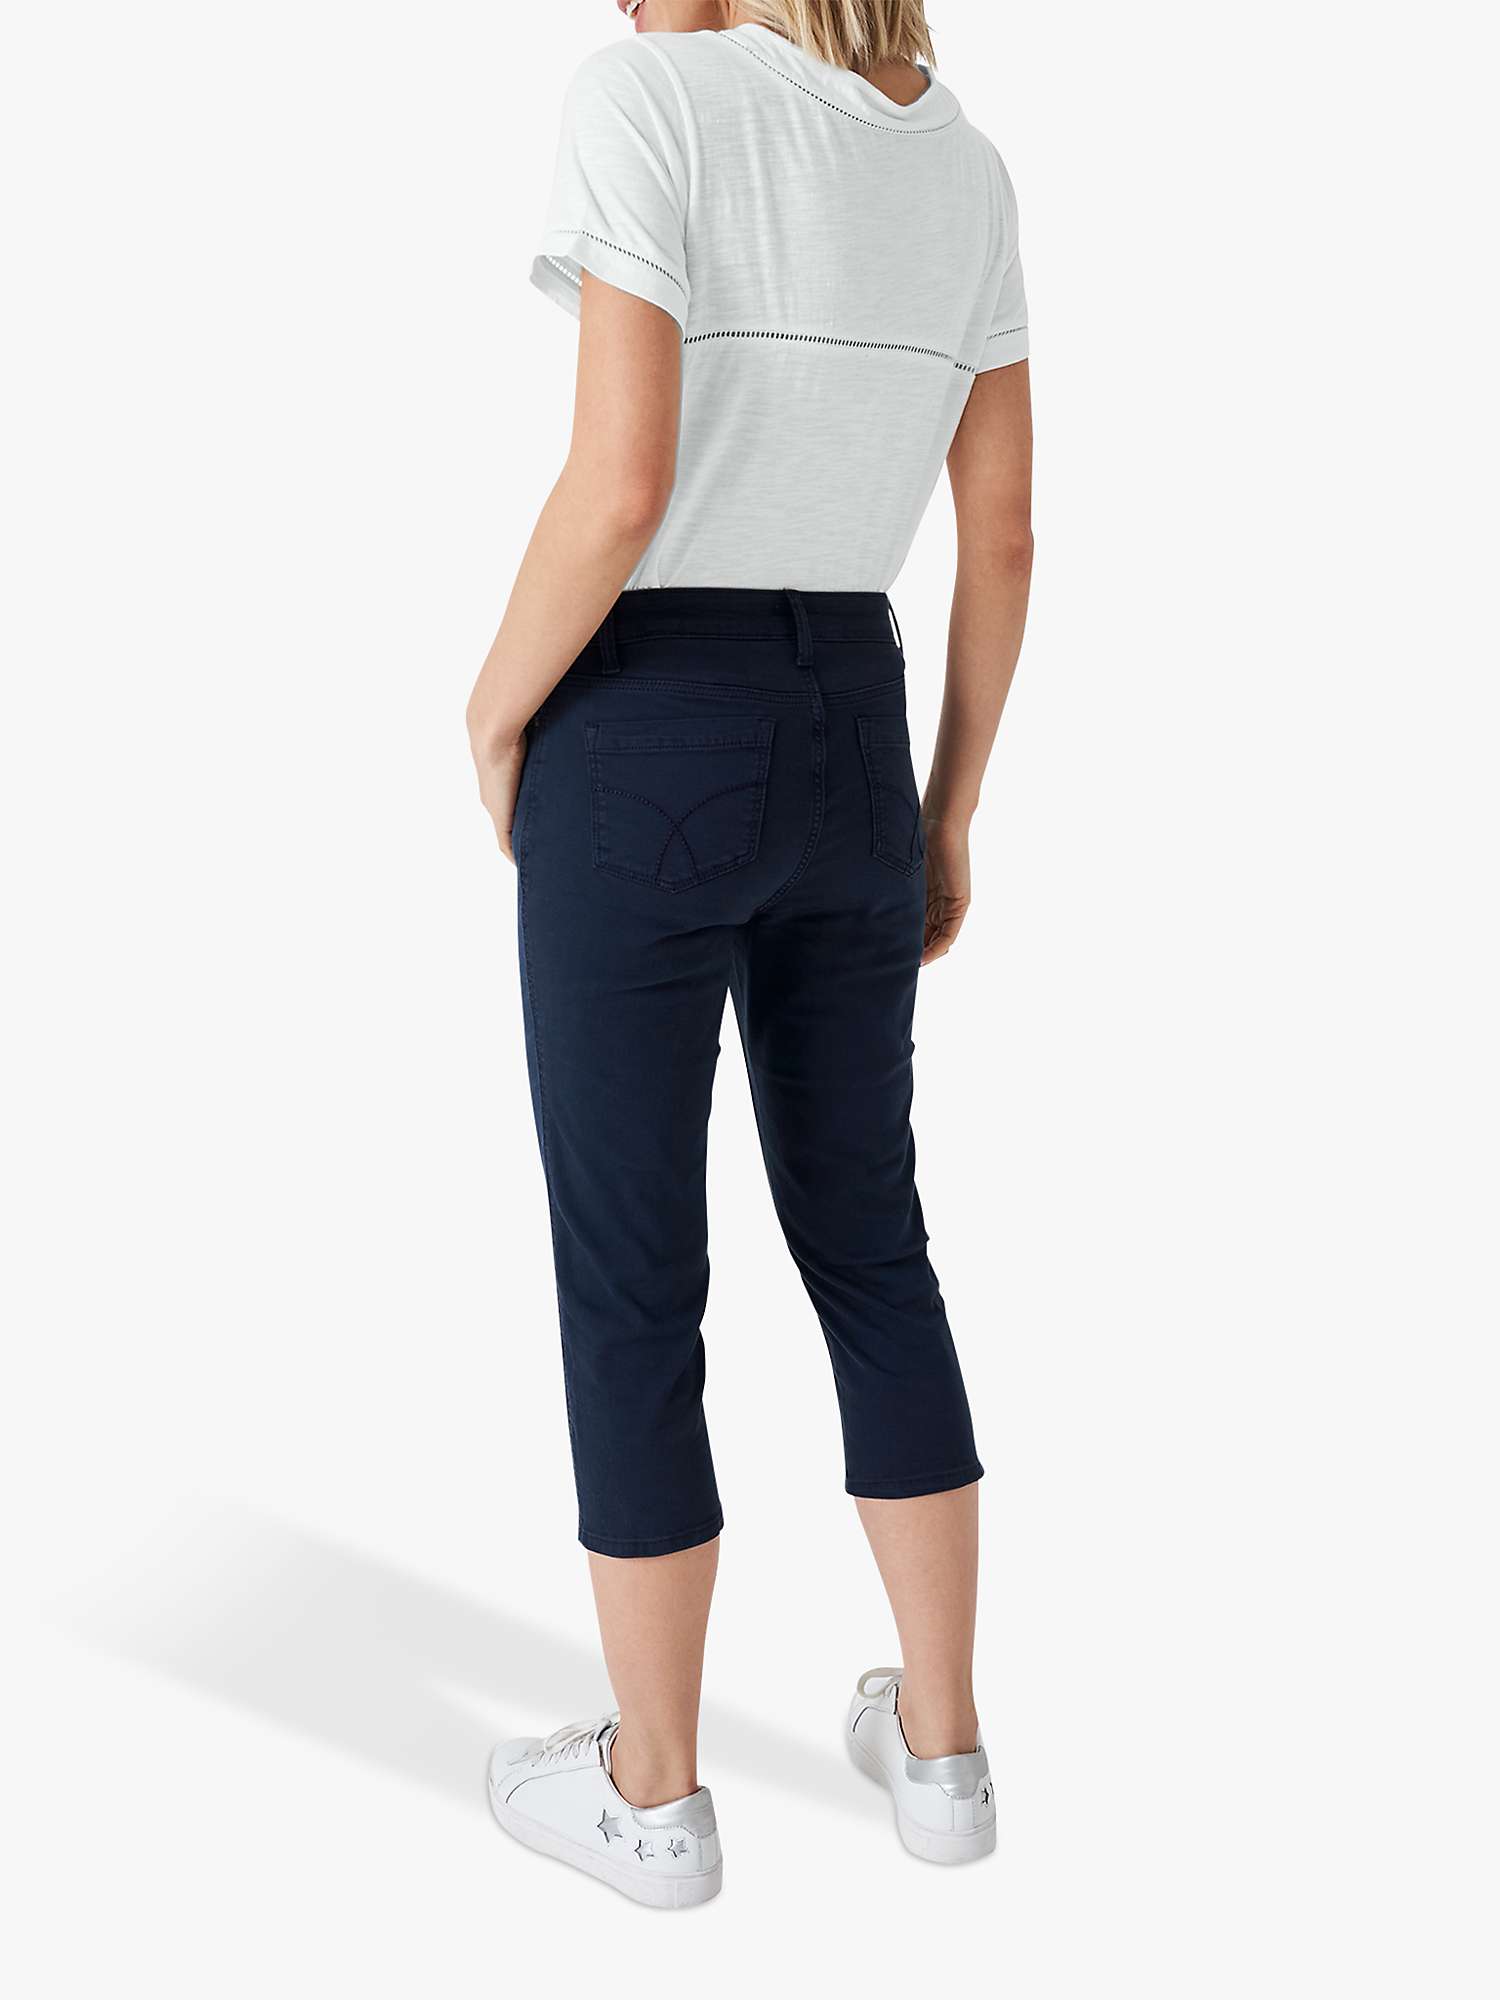 Buy Crew Clothing Murray Cropped Shorts Online at johnlewis.com